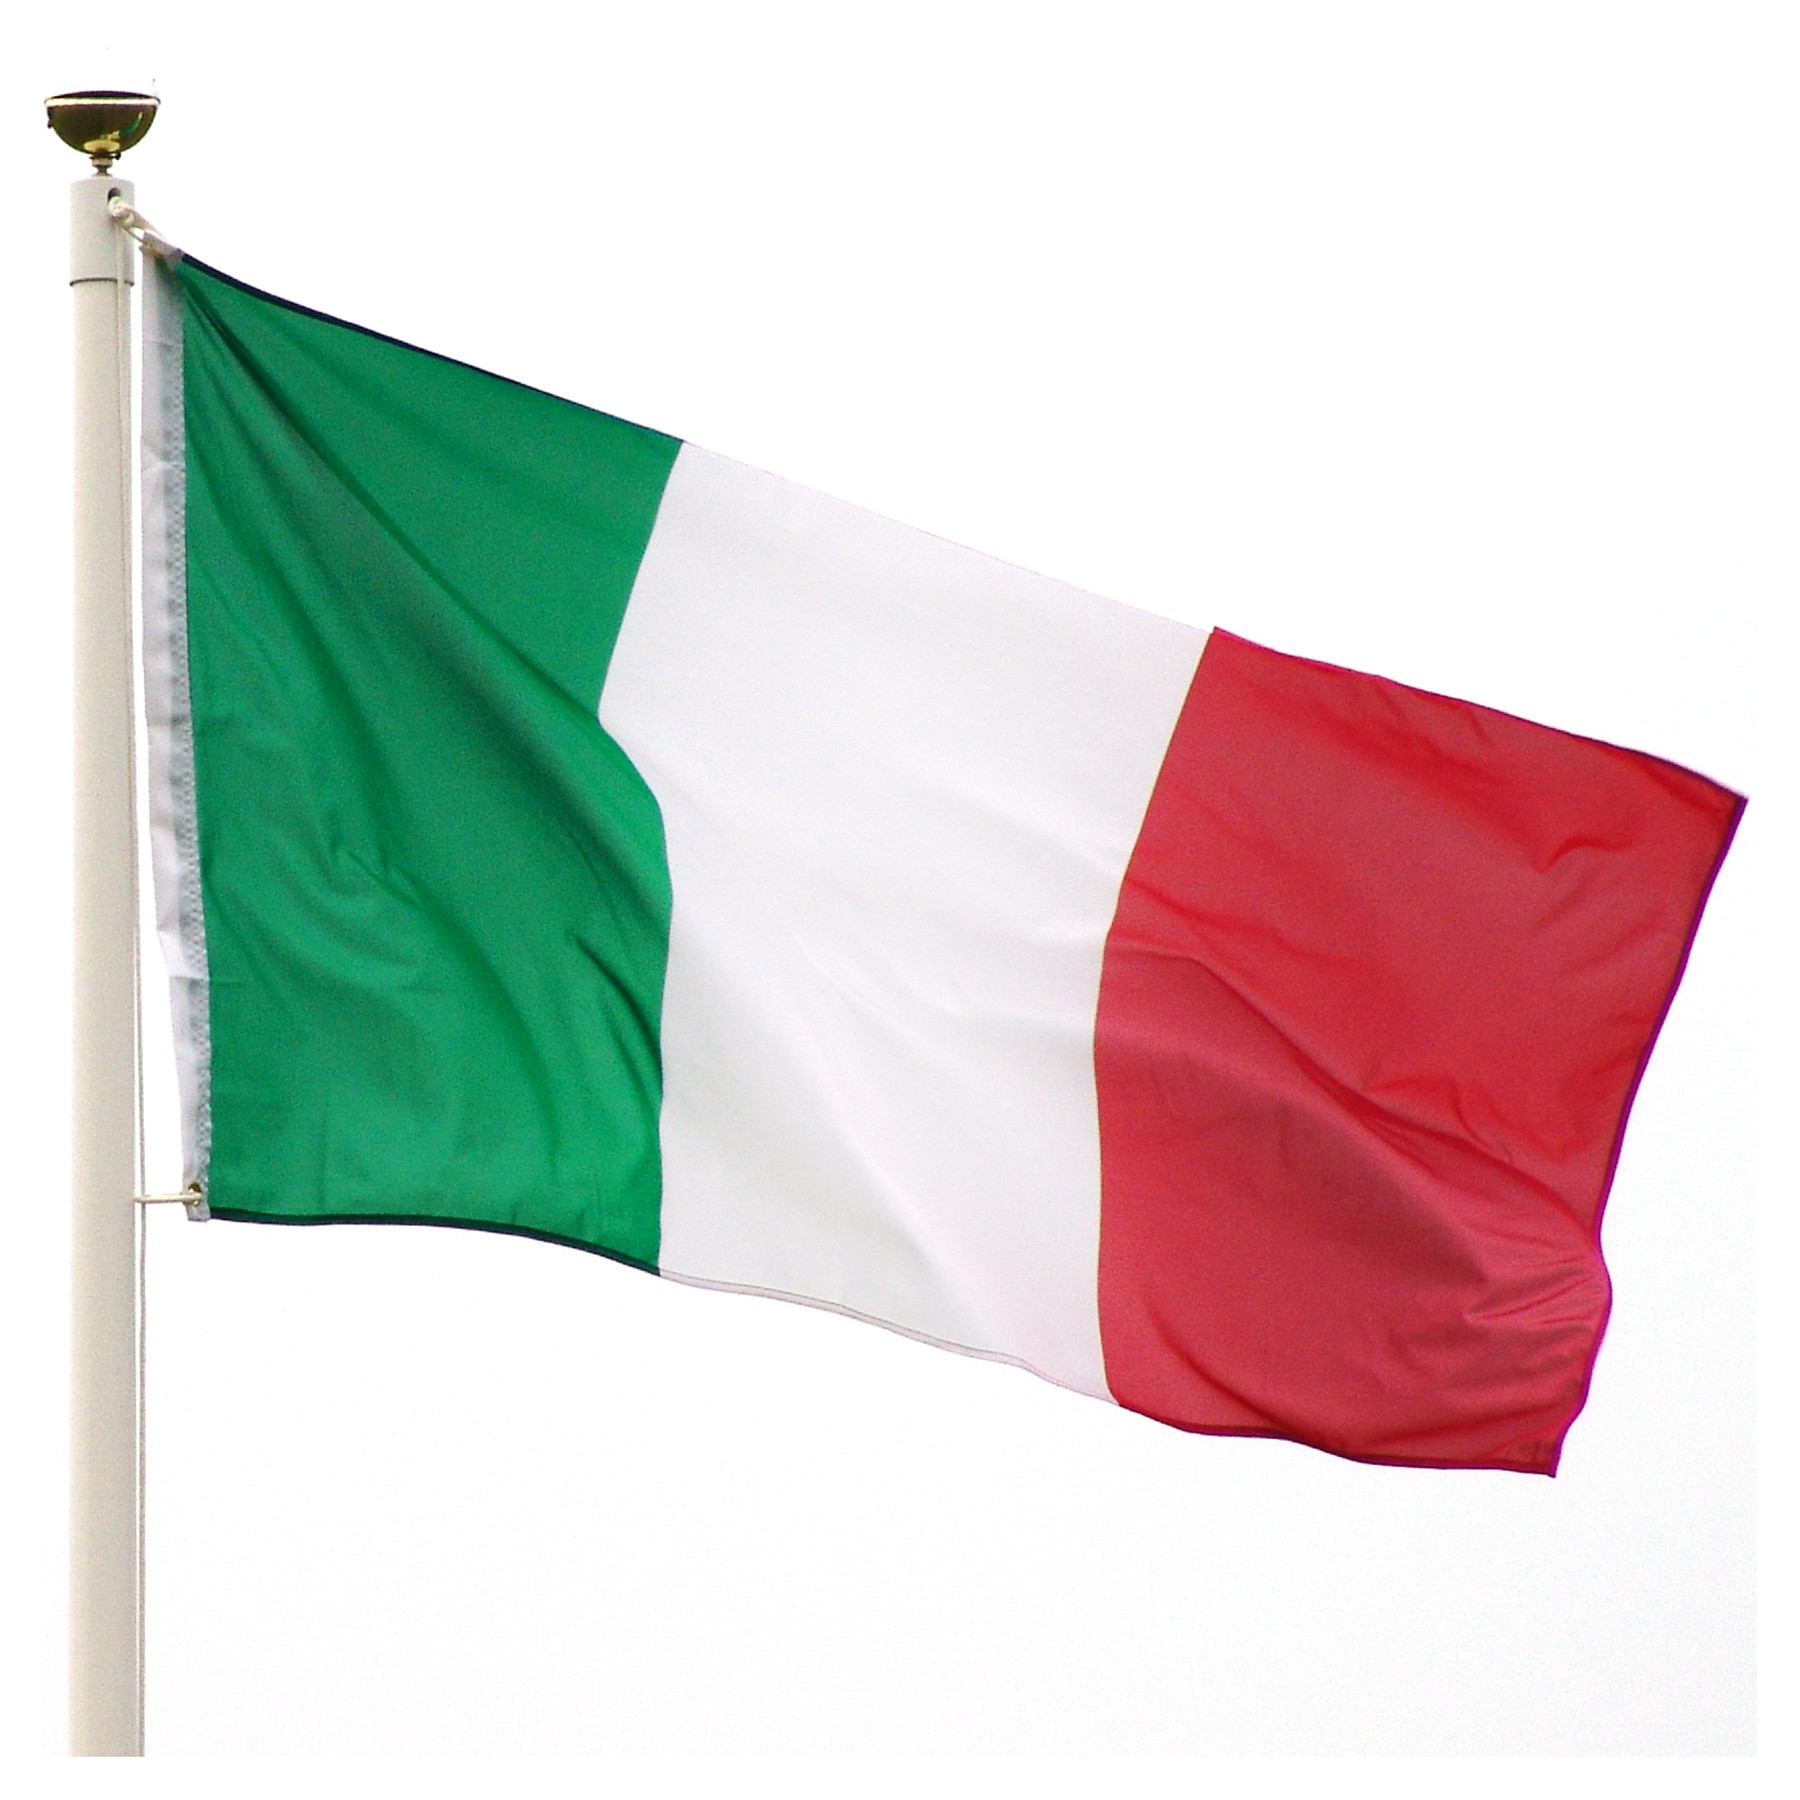 Free Italian Flag Image, Download Free Italian Flag Image png images